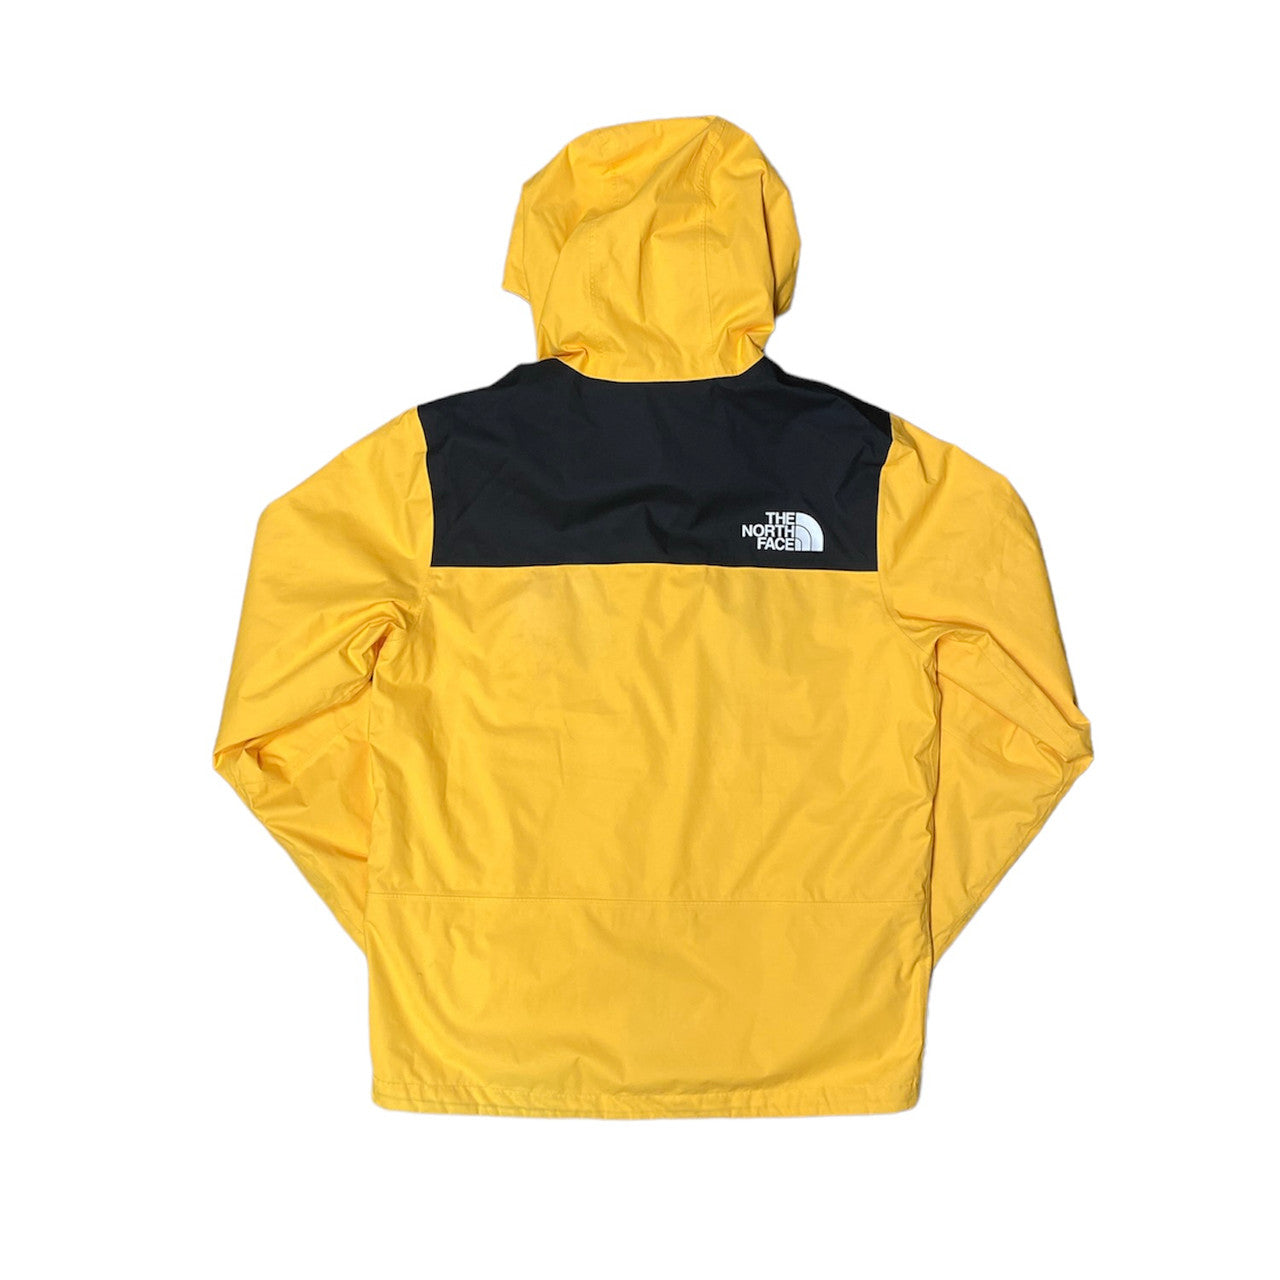 The North Face 1990 Mountain Jacket Yellow Black